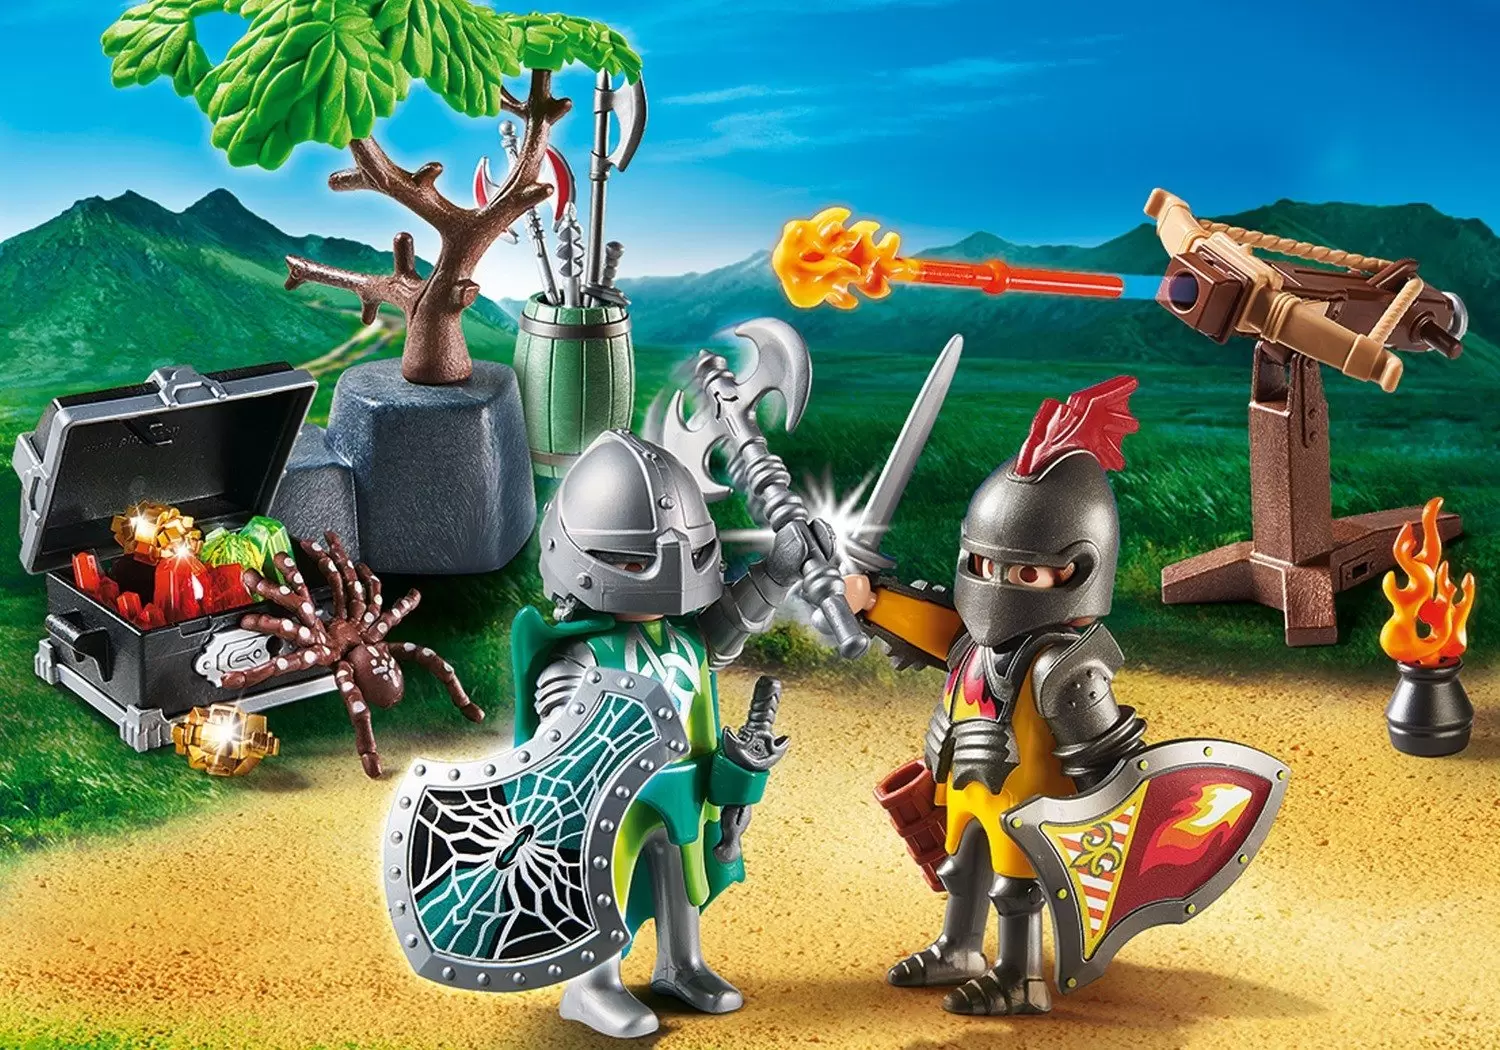 Grens ondernemen Schots Kights Fight Starter Pack - Playmobil Middle-Ages 70036